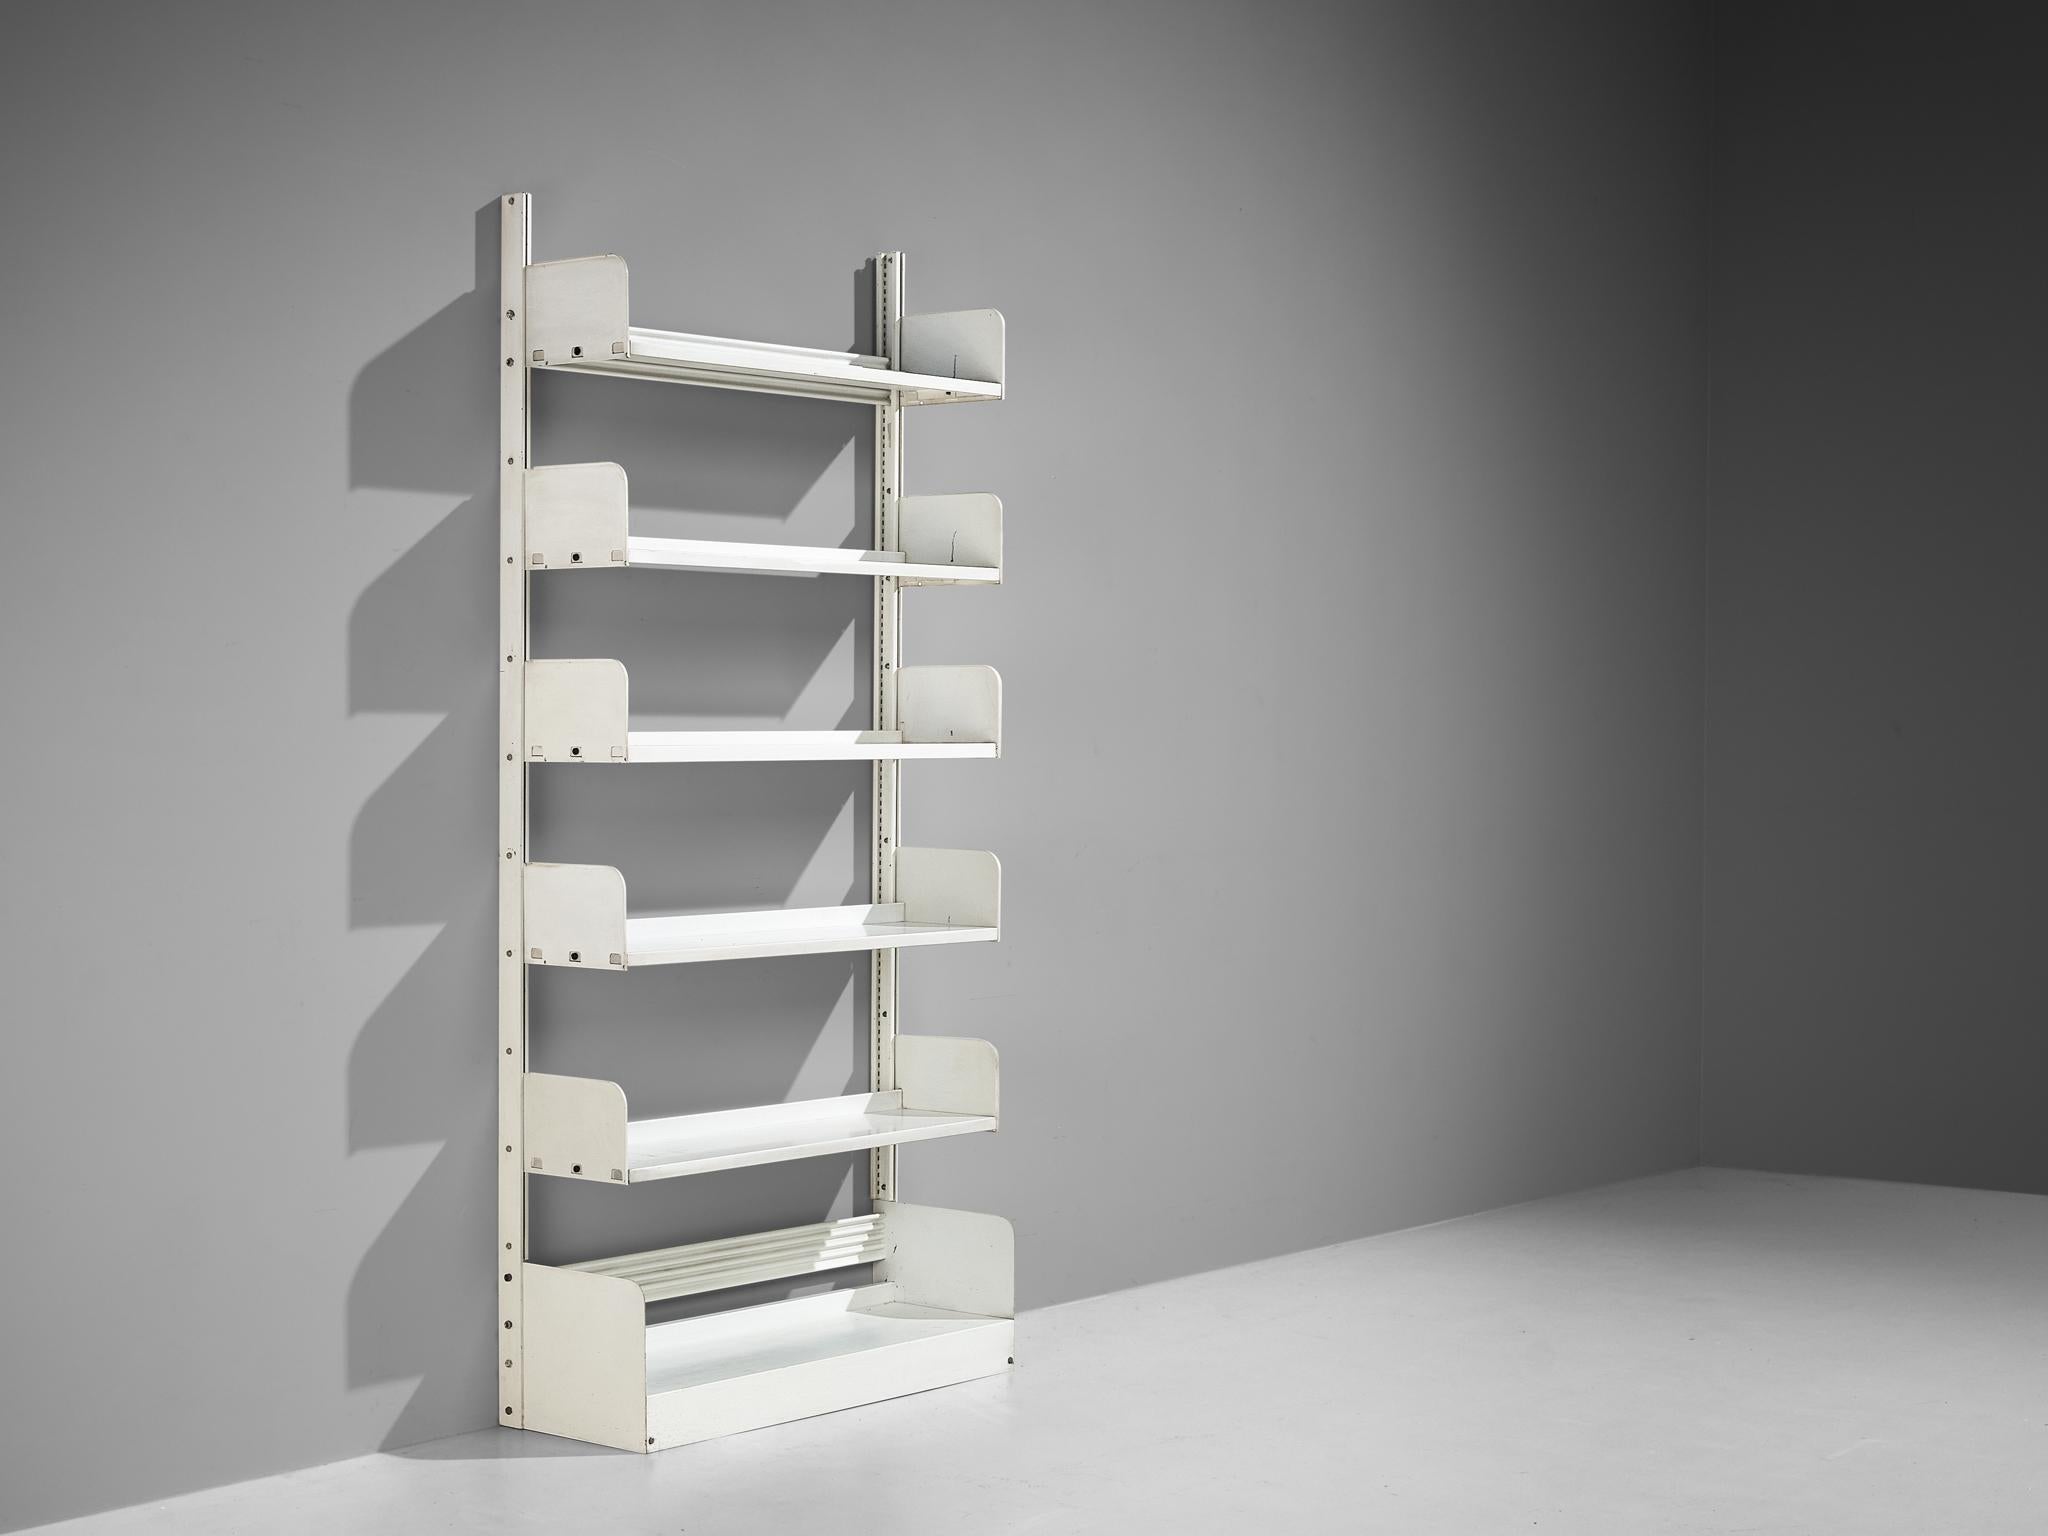 Lips Vago, 'Congresso' shelving unit, white lacquered steel, Italy, 1960s.

Constructed from steel sheets, the 'Congresso' shelf is a sturdy yet unassuming bookcase that can be used as a storage solution or a room divider, making it a versatile